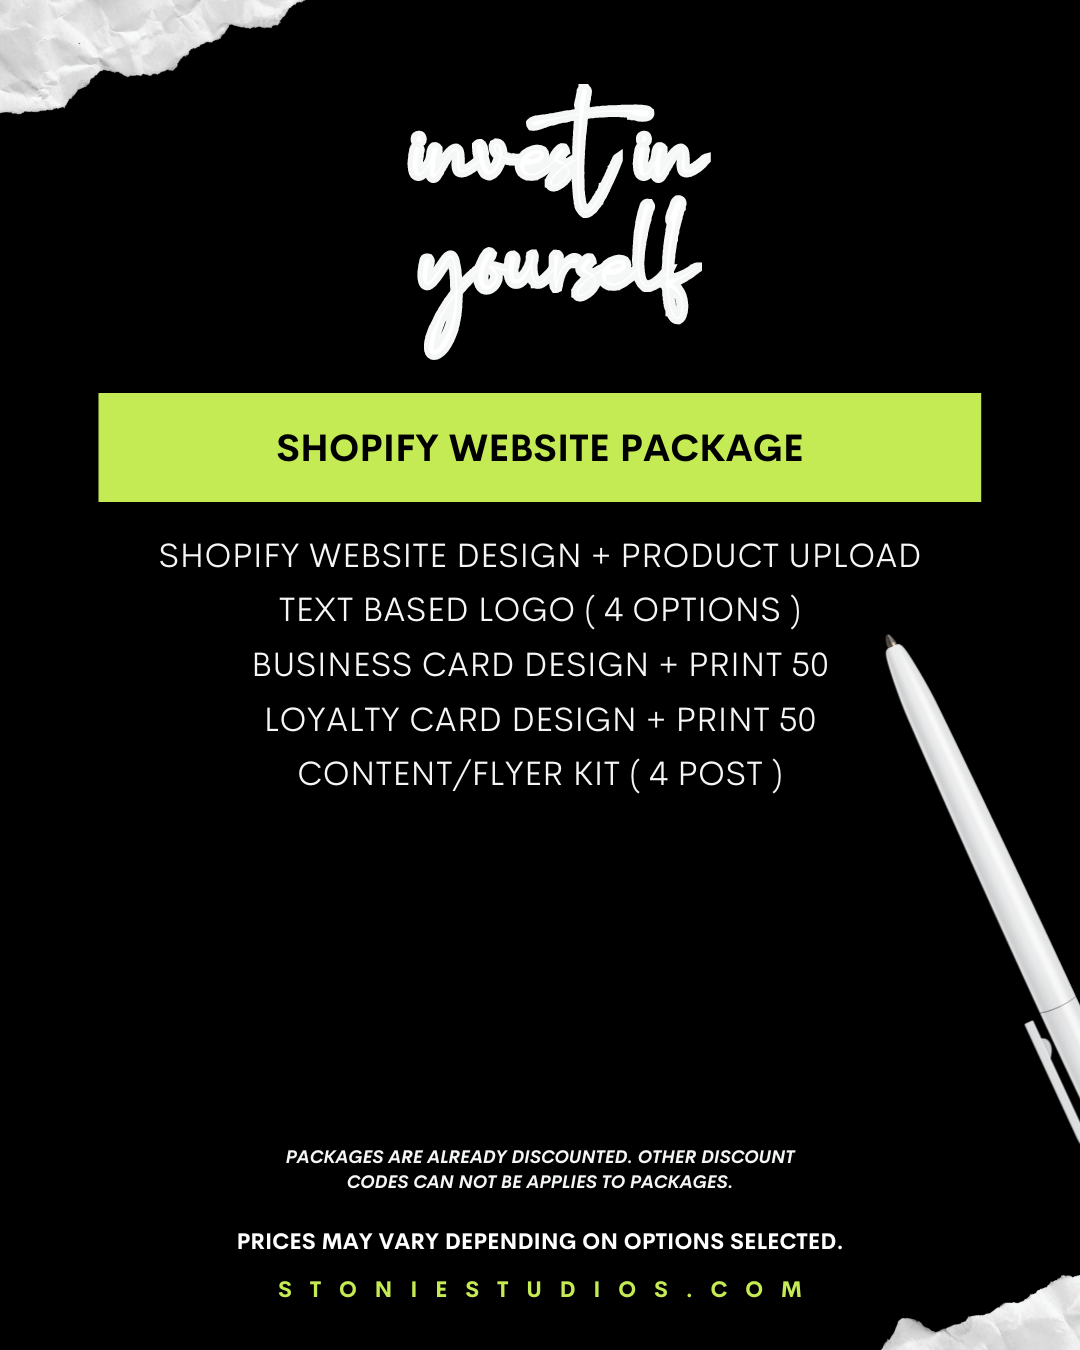 SHOPIFY WEBSITE PACKAGE